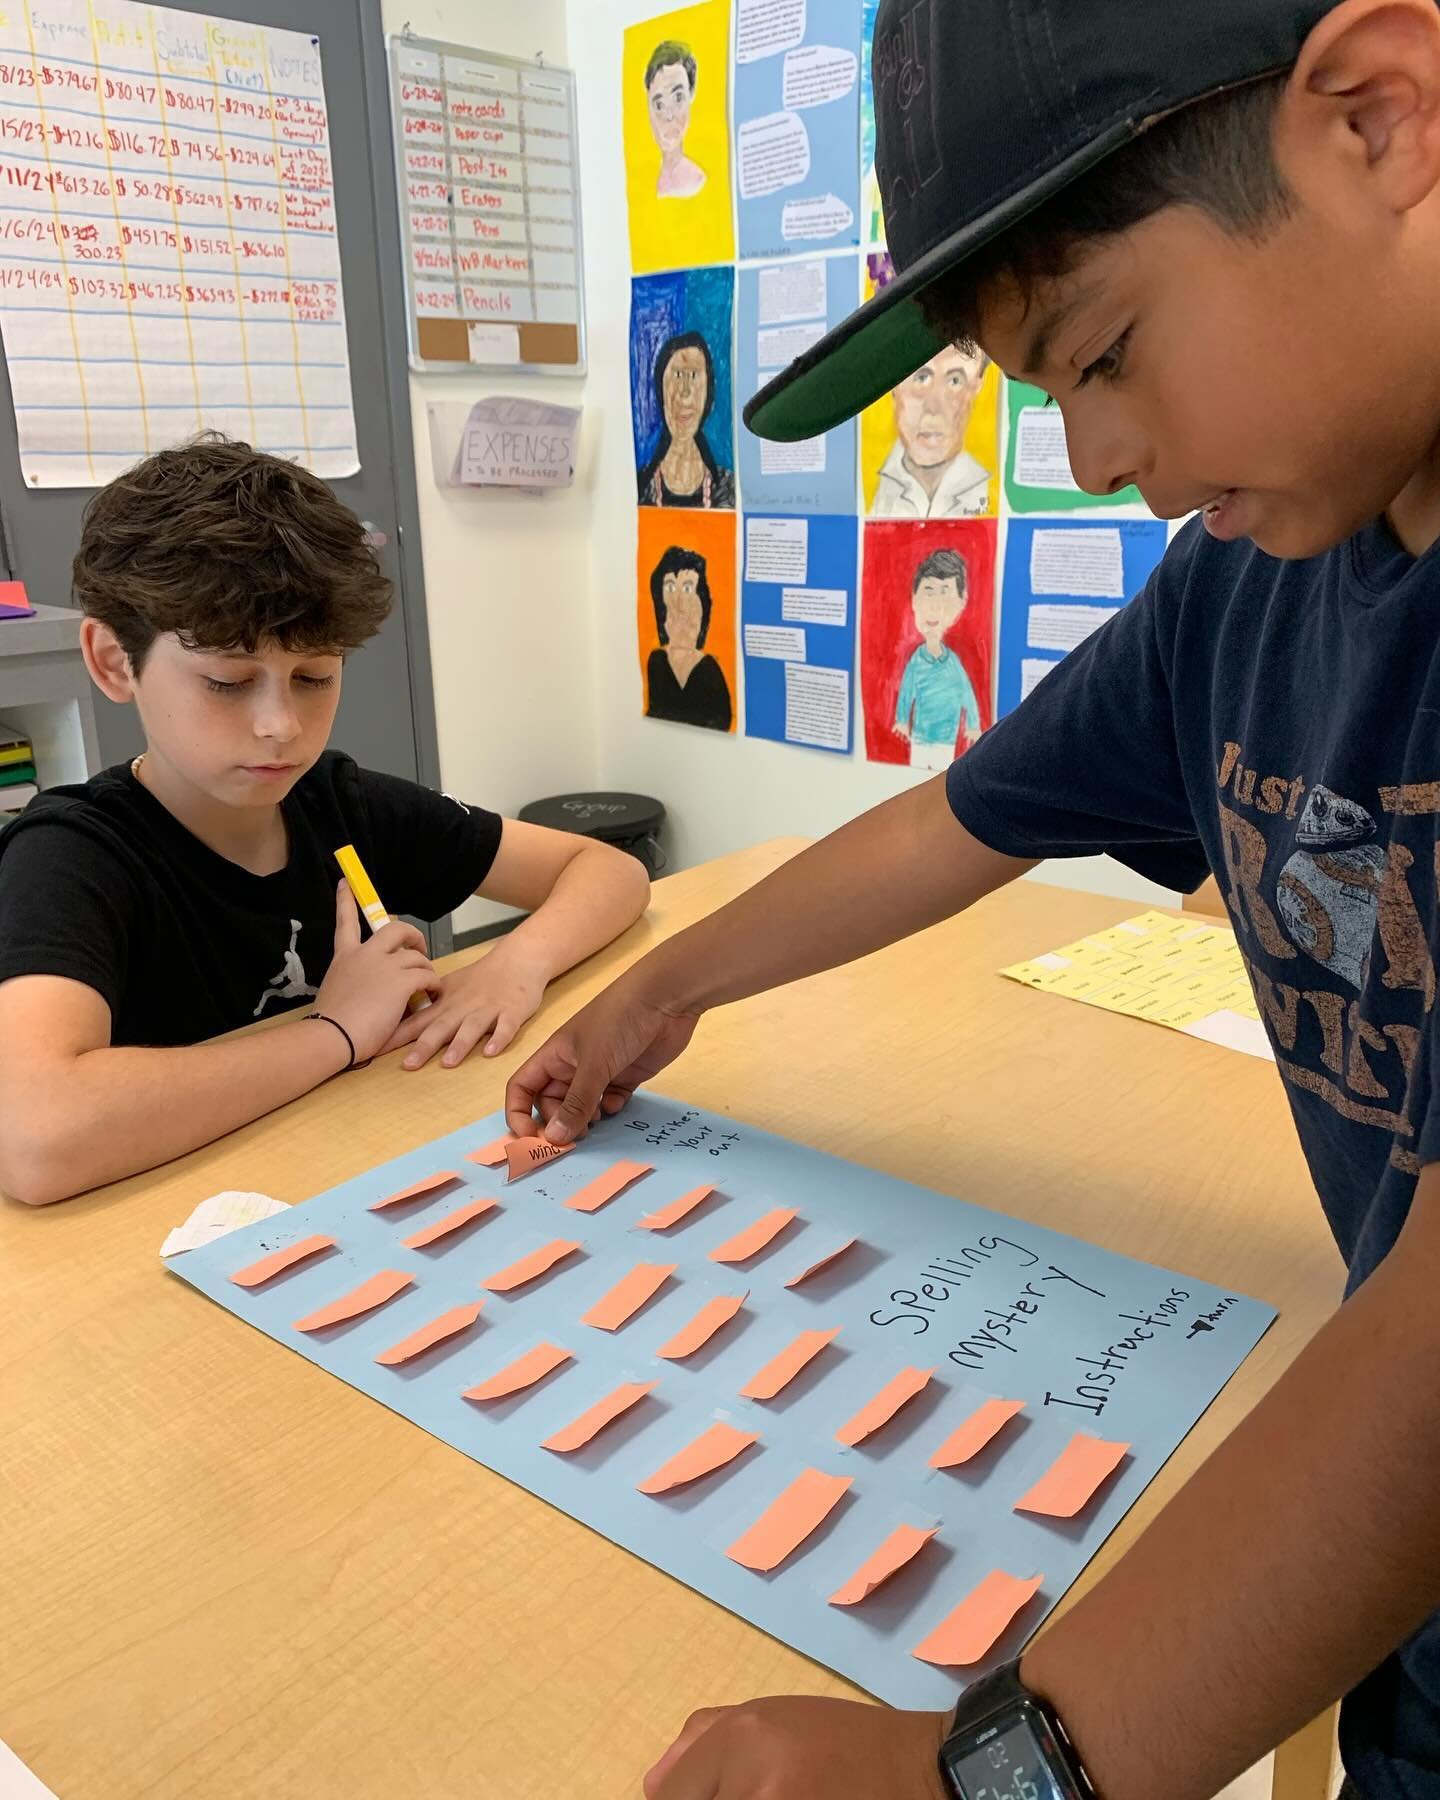 Group Fivers created their own spelling games and played them this week. The children made match games, board games, spelling charades, memory games, and even &ldquo;Spelling Knockout.&rdquo;